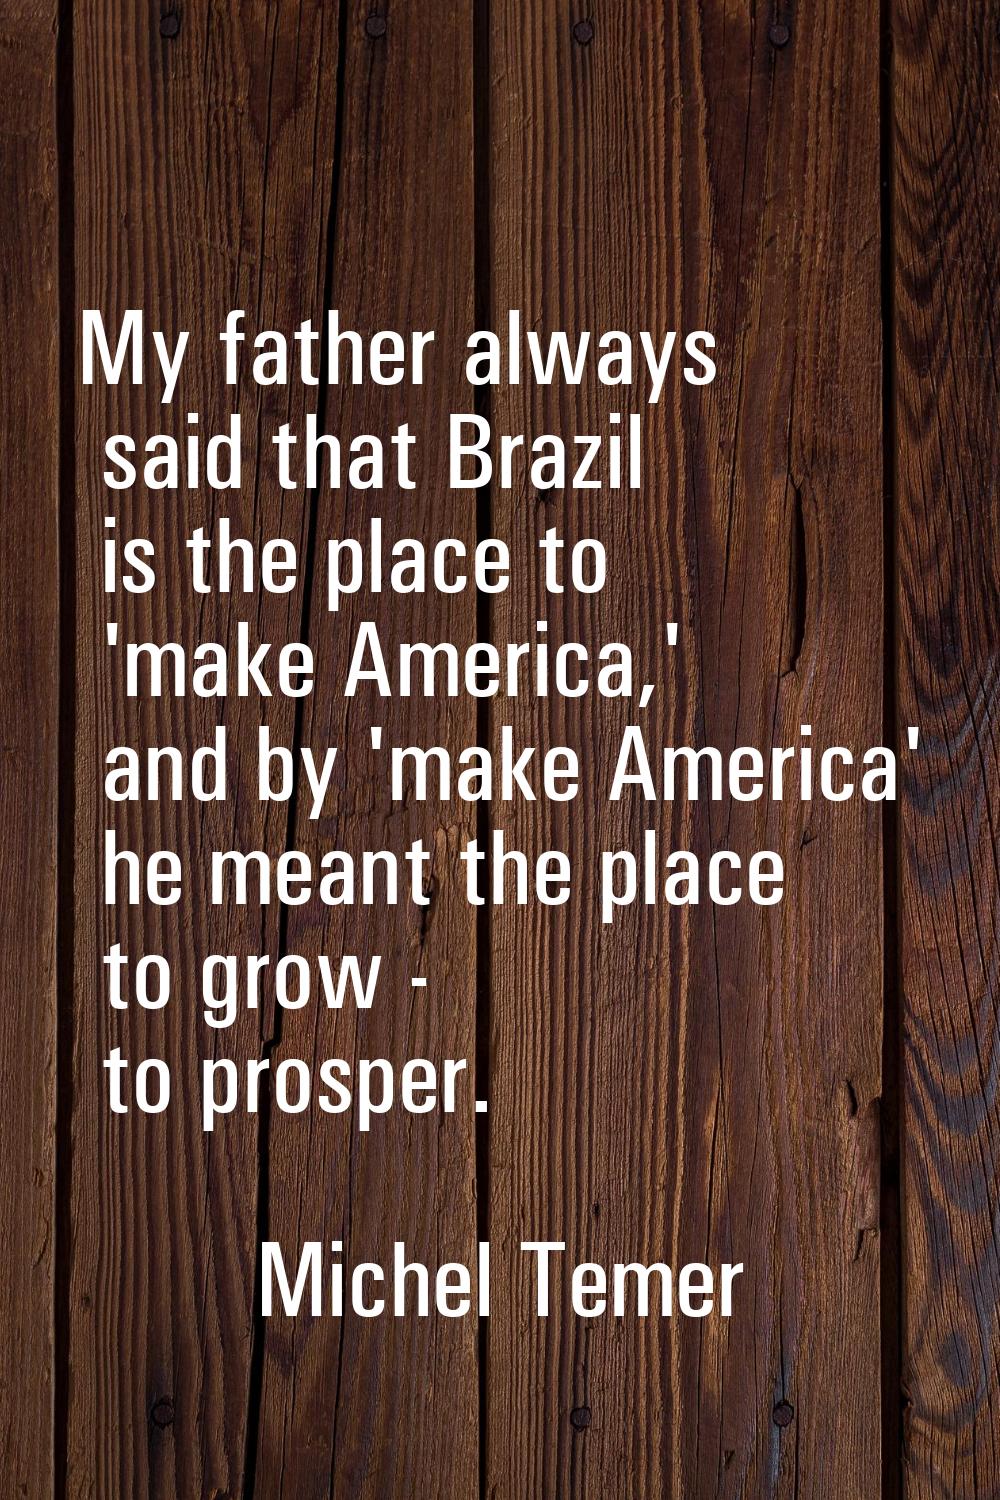 My father always said that Brazil is the place to 'make America,' and by 'make America' he meant th